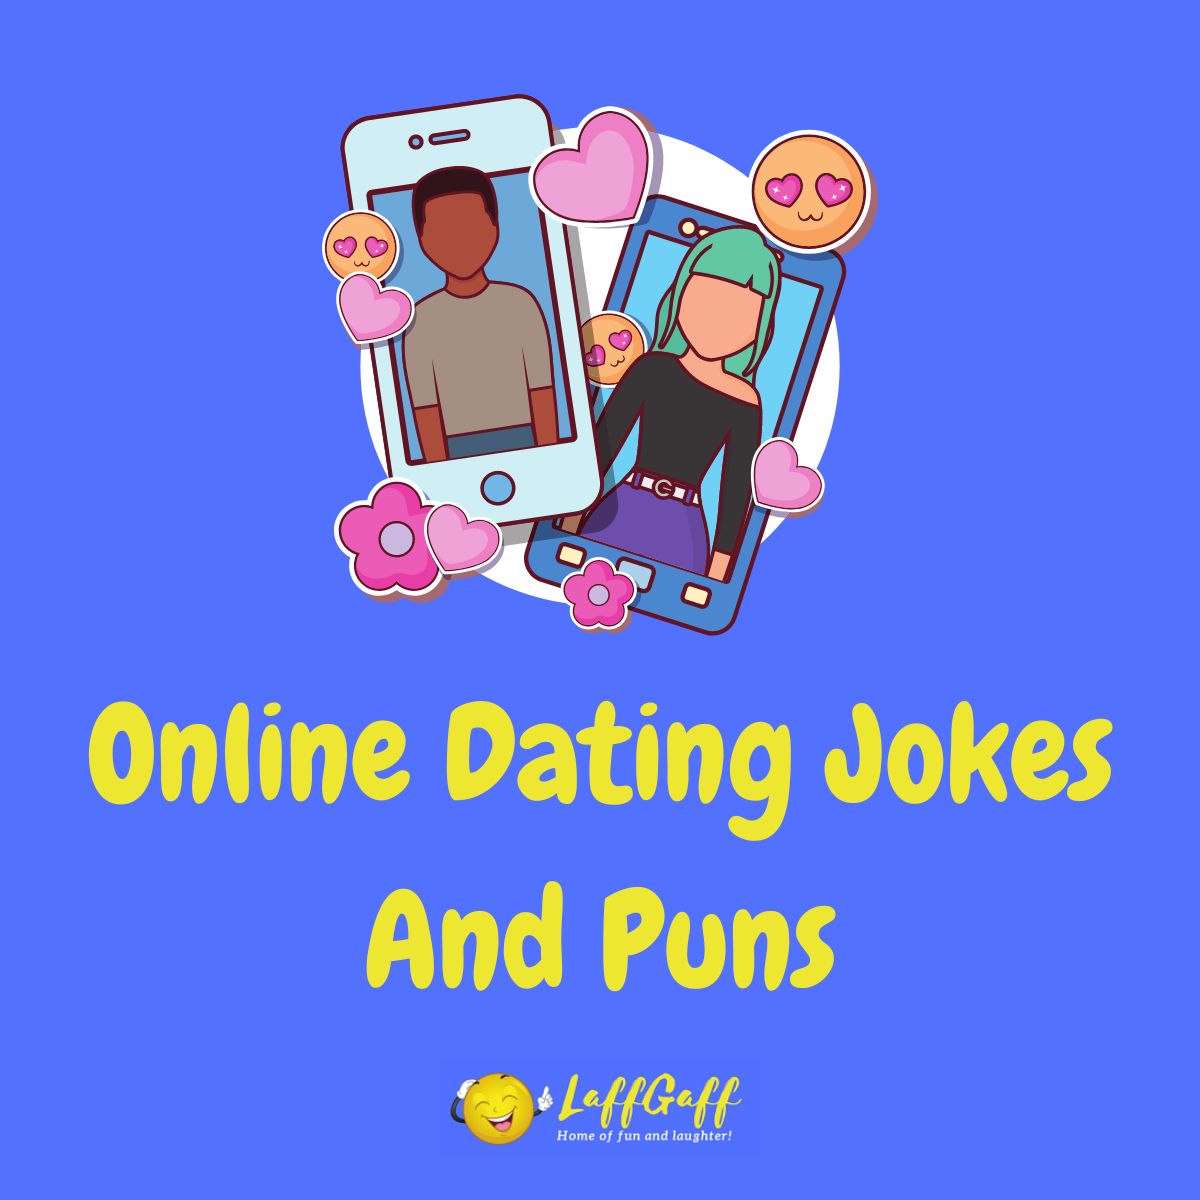 Featured image for a page of online dating jokes and puns.